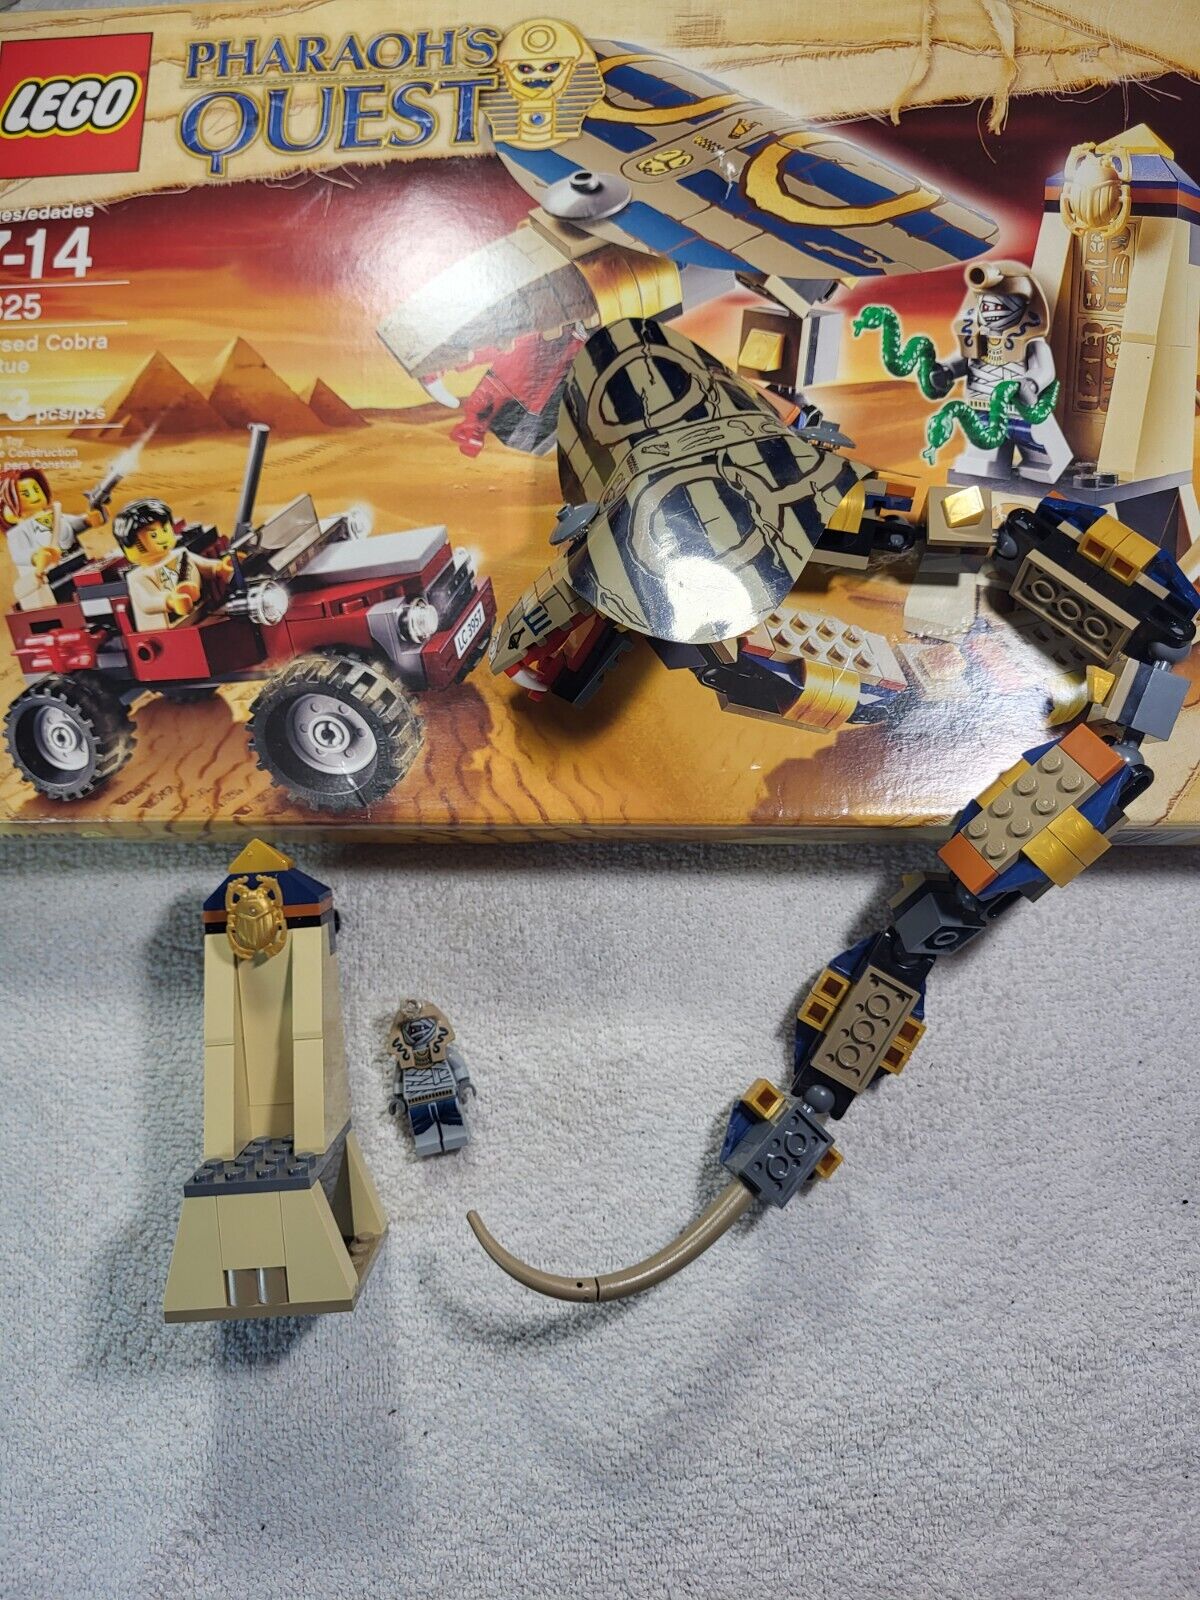 LEGO Pharaoh's Quest: Cursed Cobra Statue (7325) Snake Minifigure And Box 